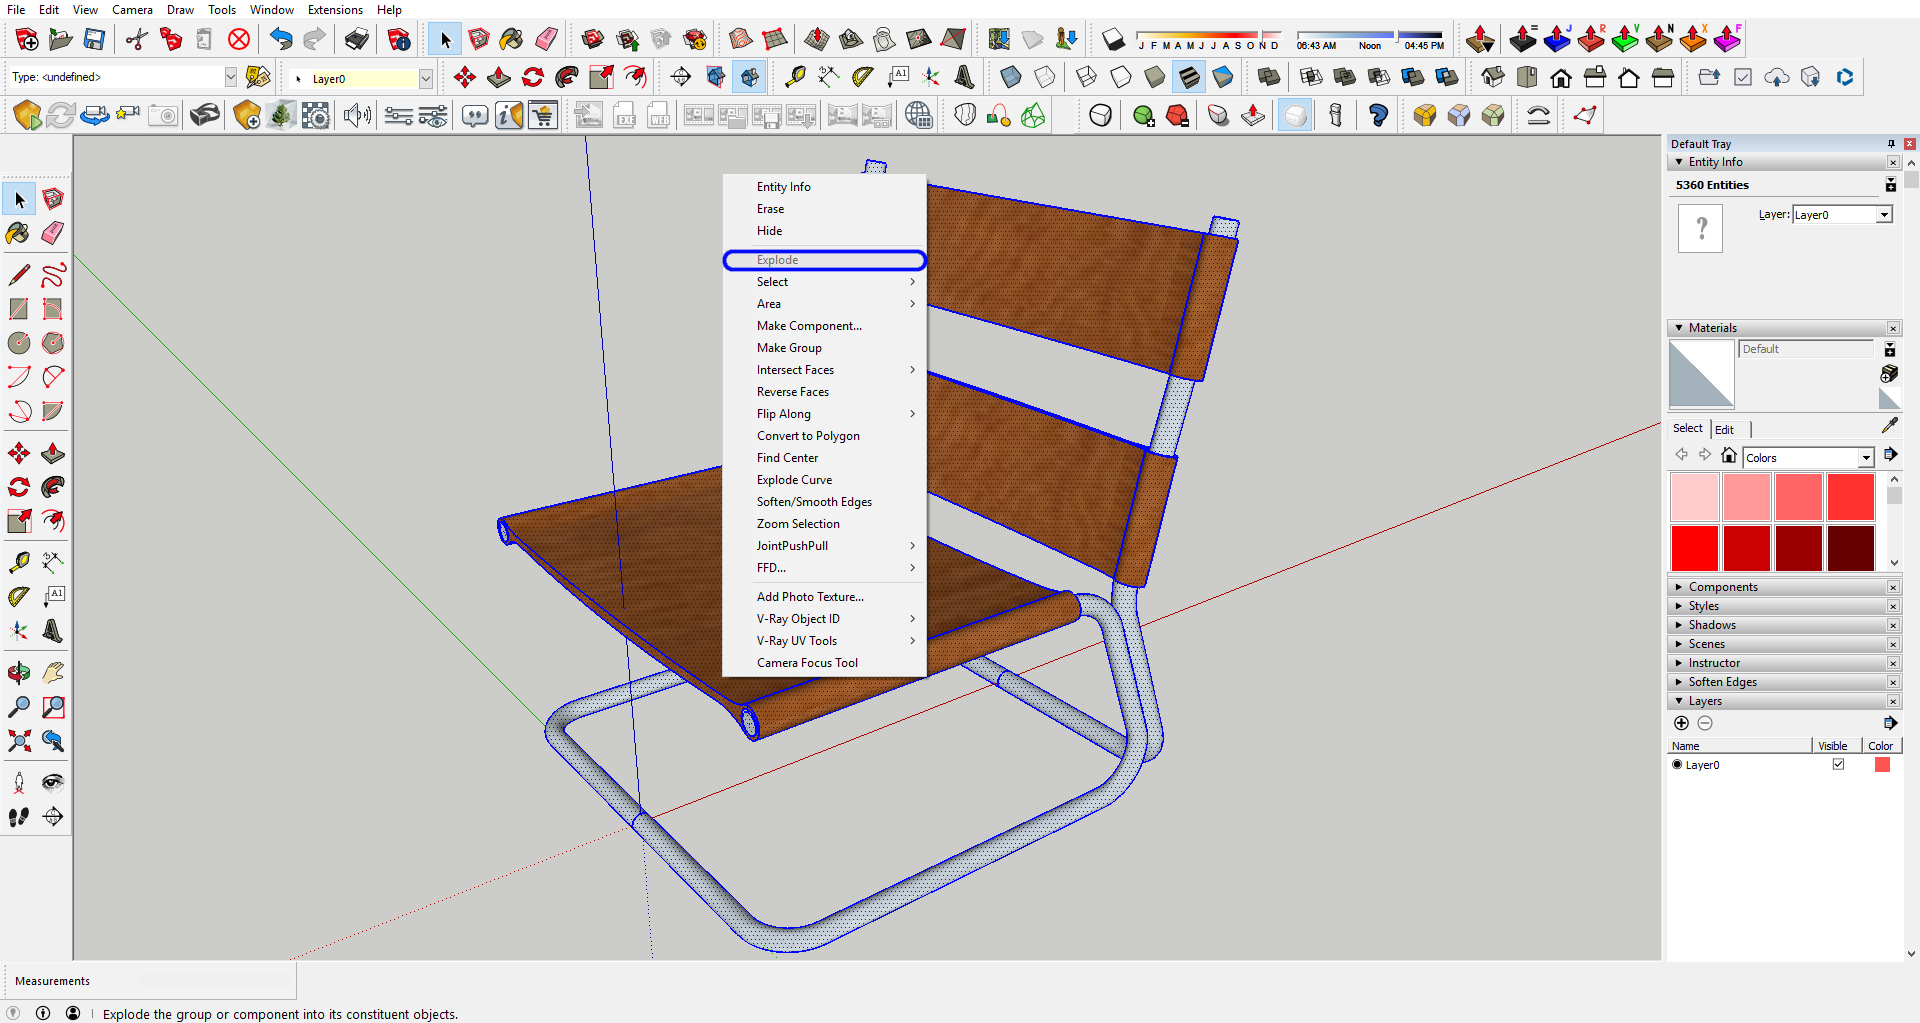 It indicates how to explode the Sketchup model